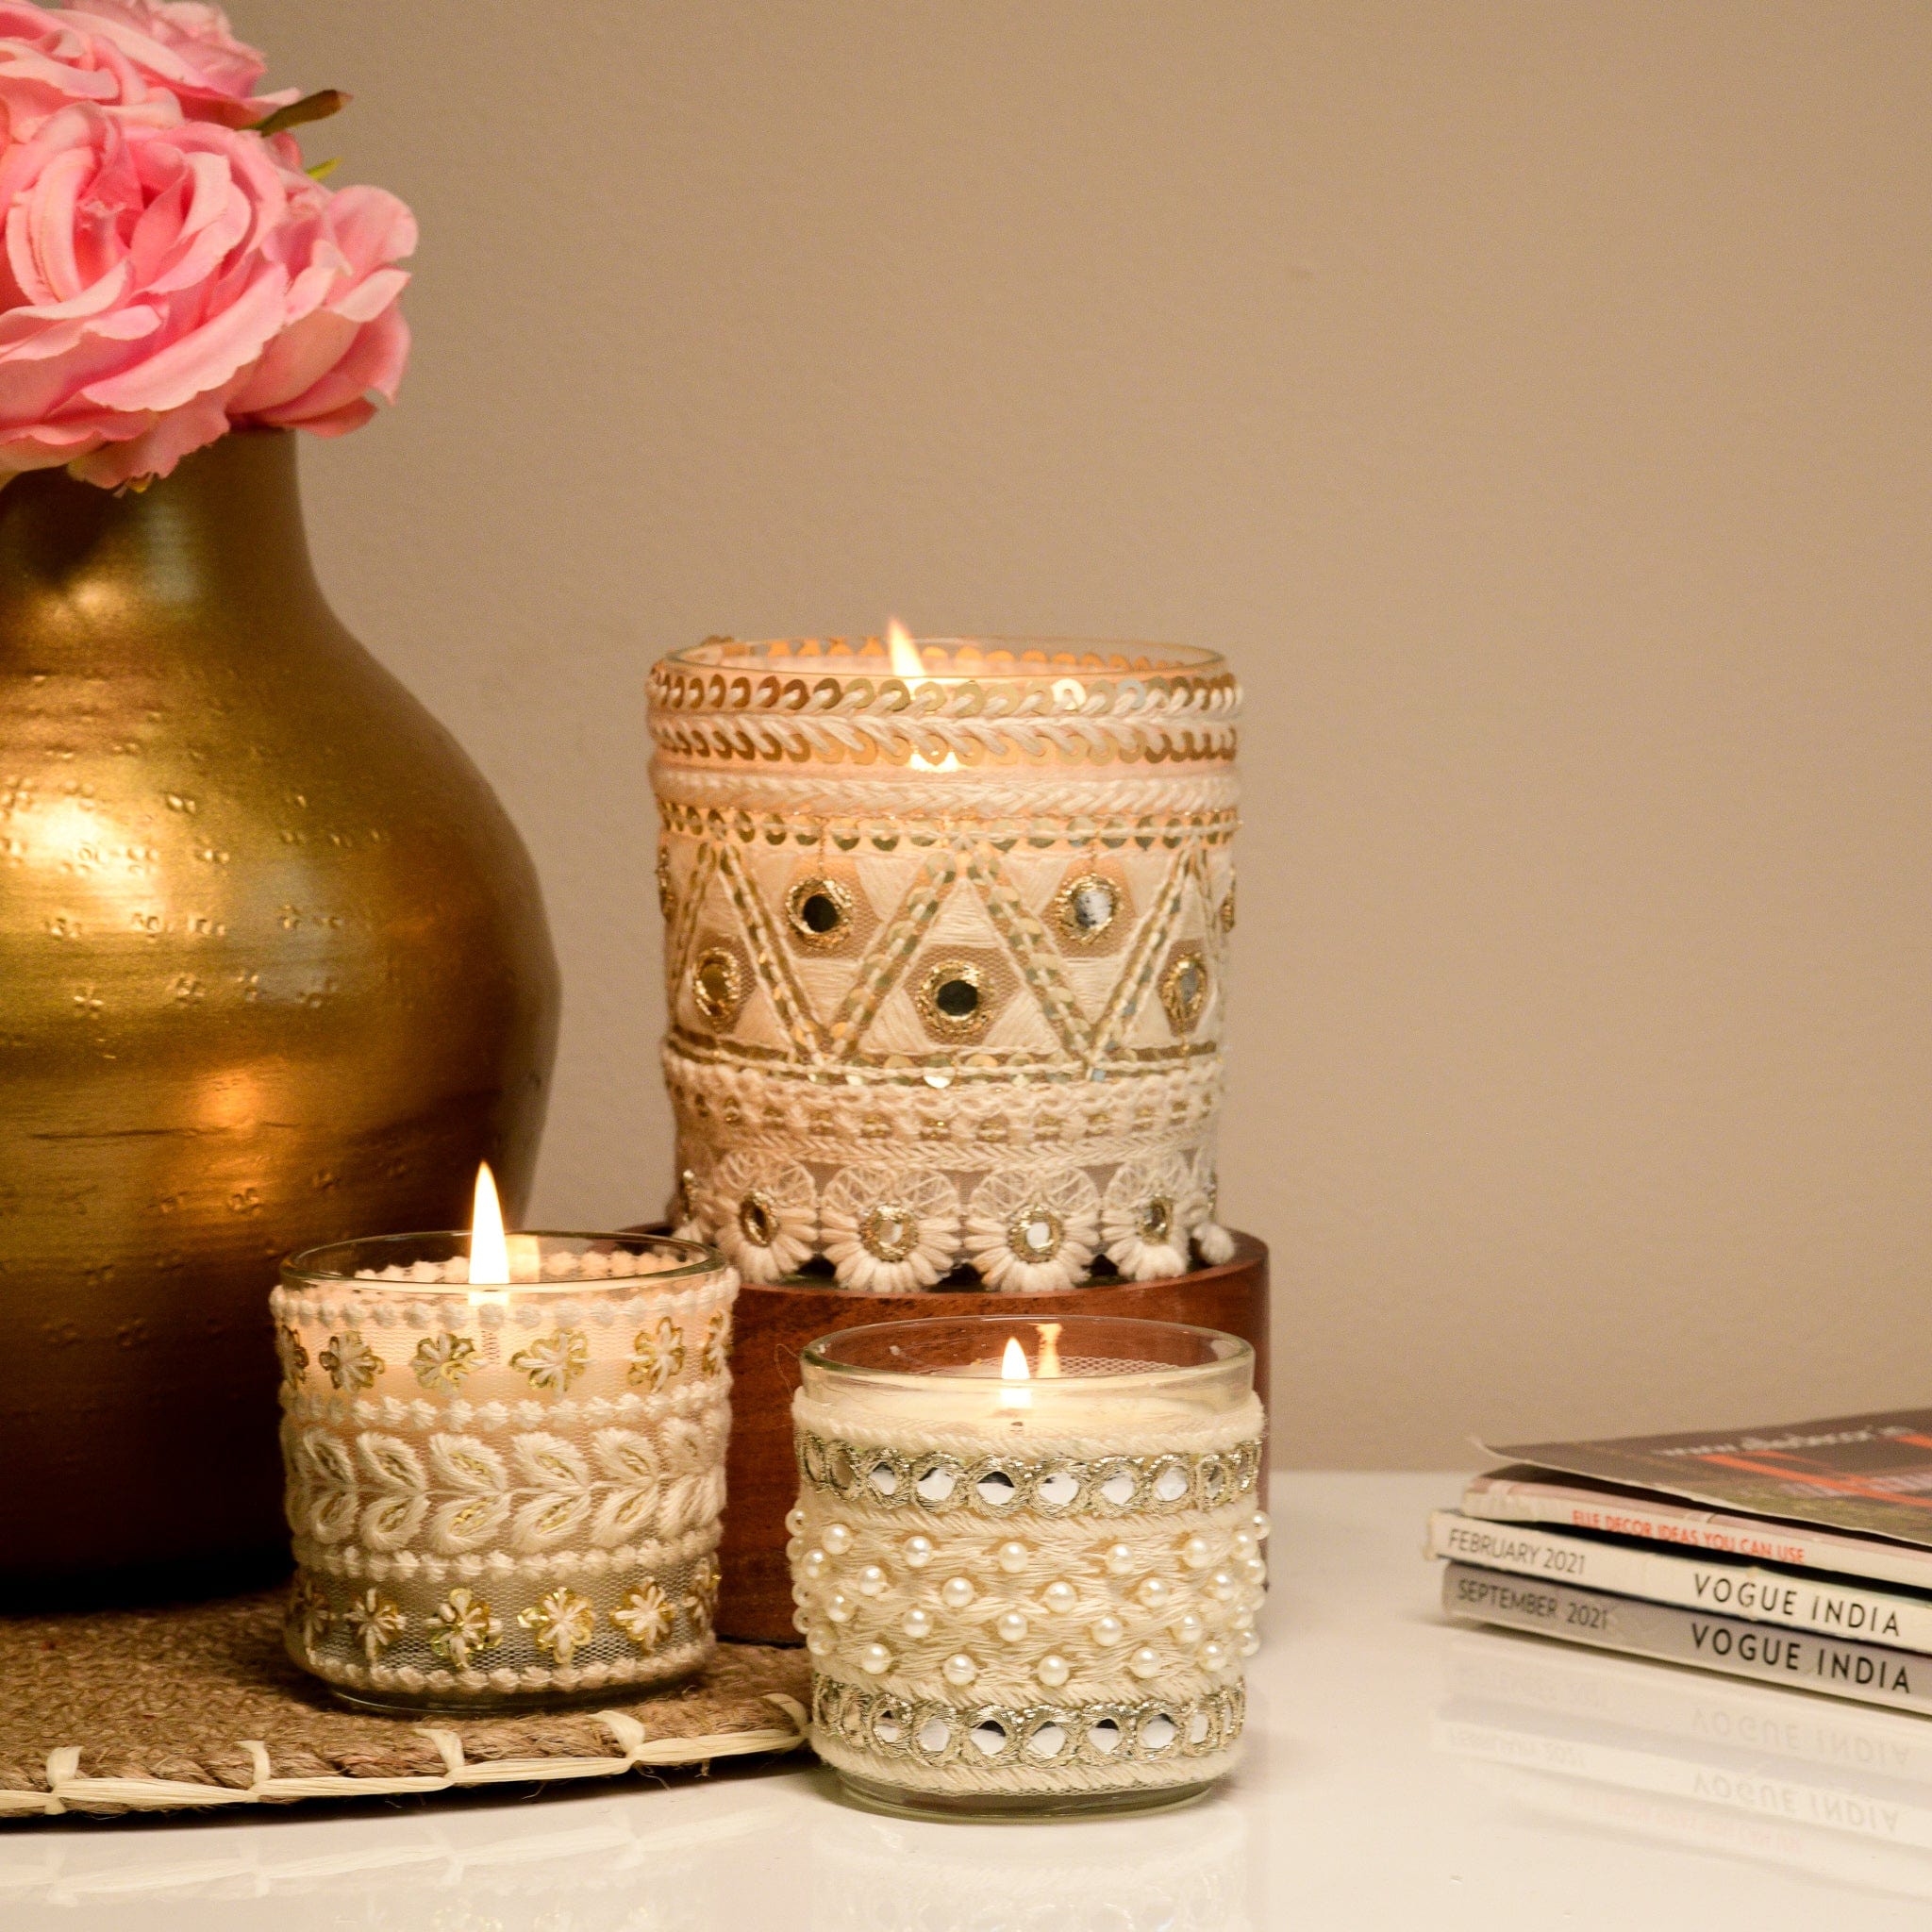 Shukr - Gift Set of 3 Scented Candles